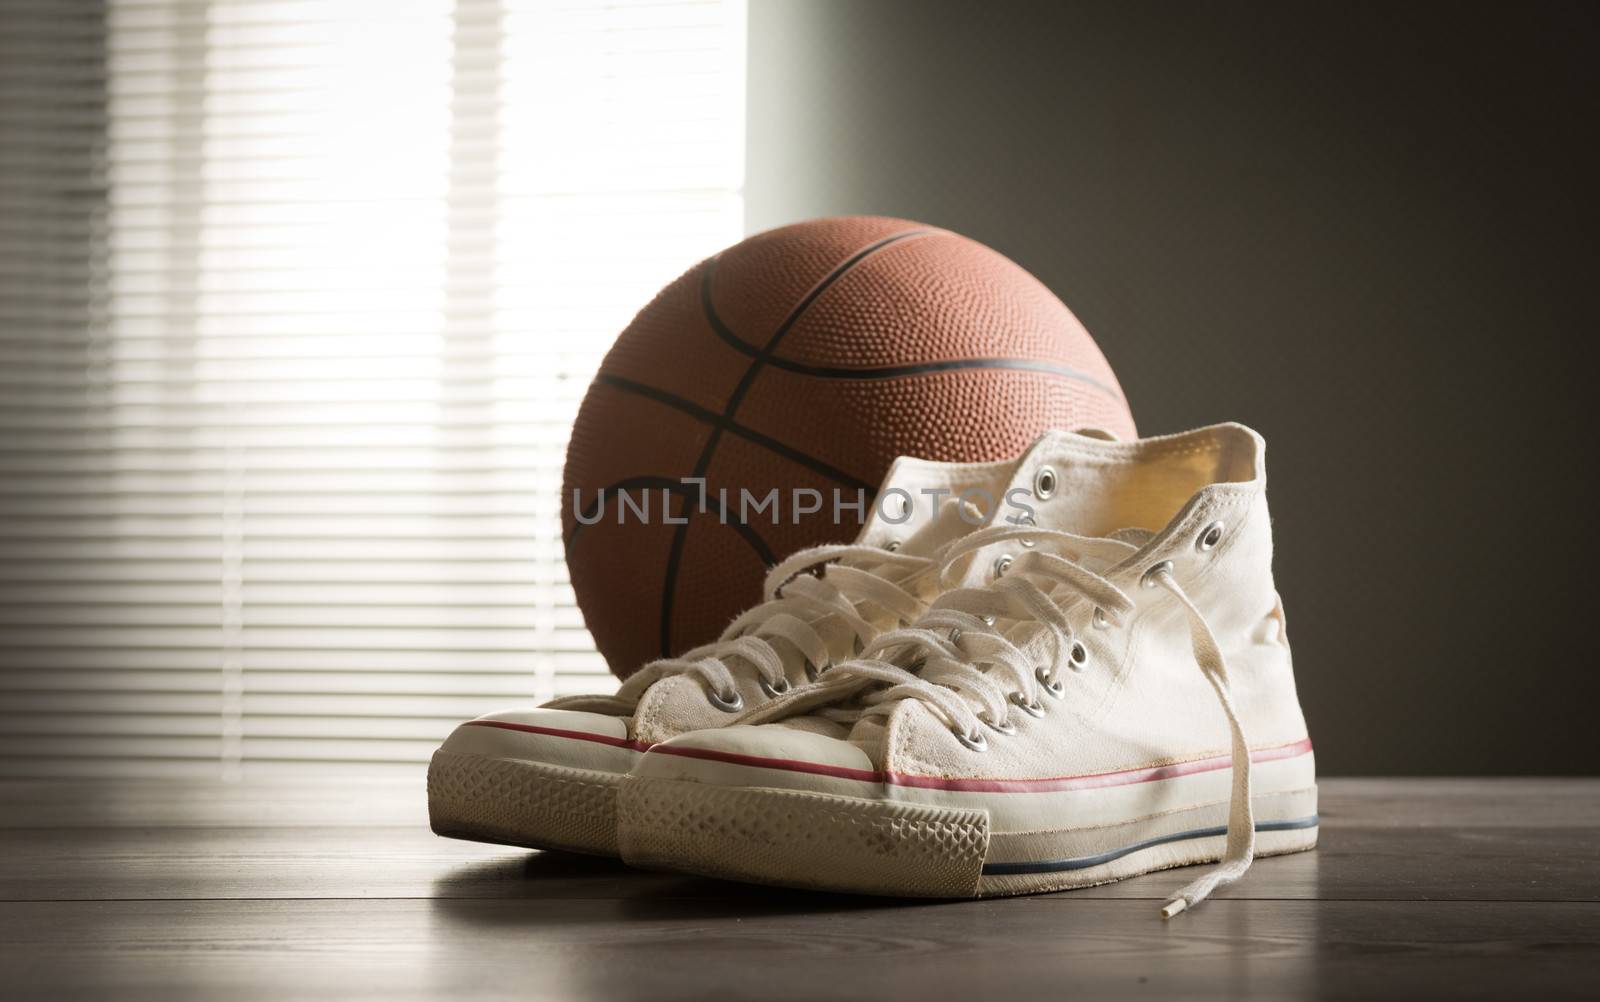 Shoes and basketball by stokkete